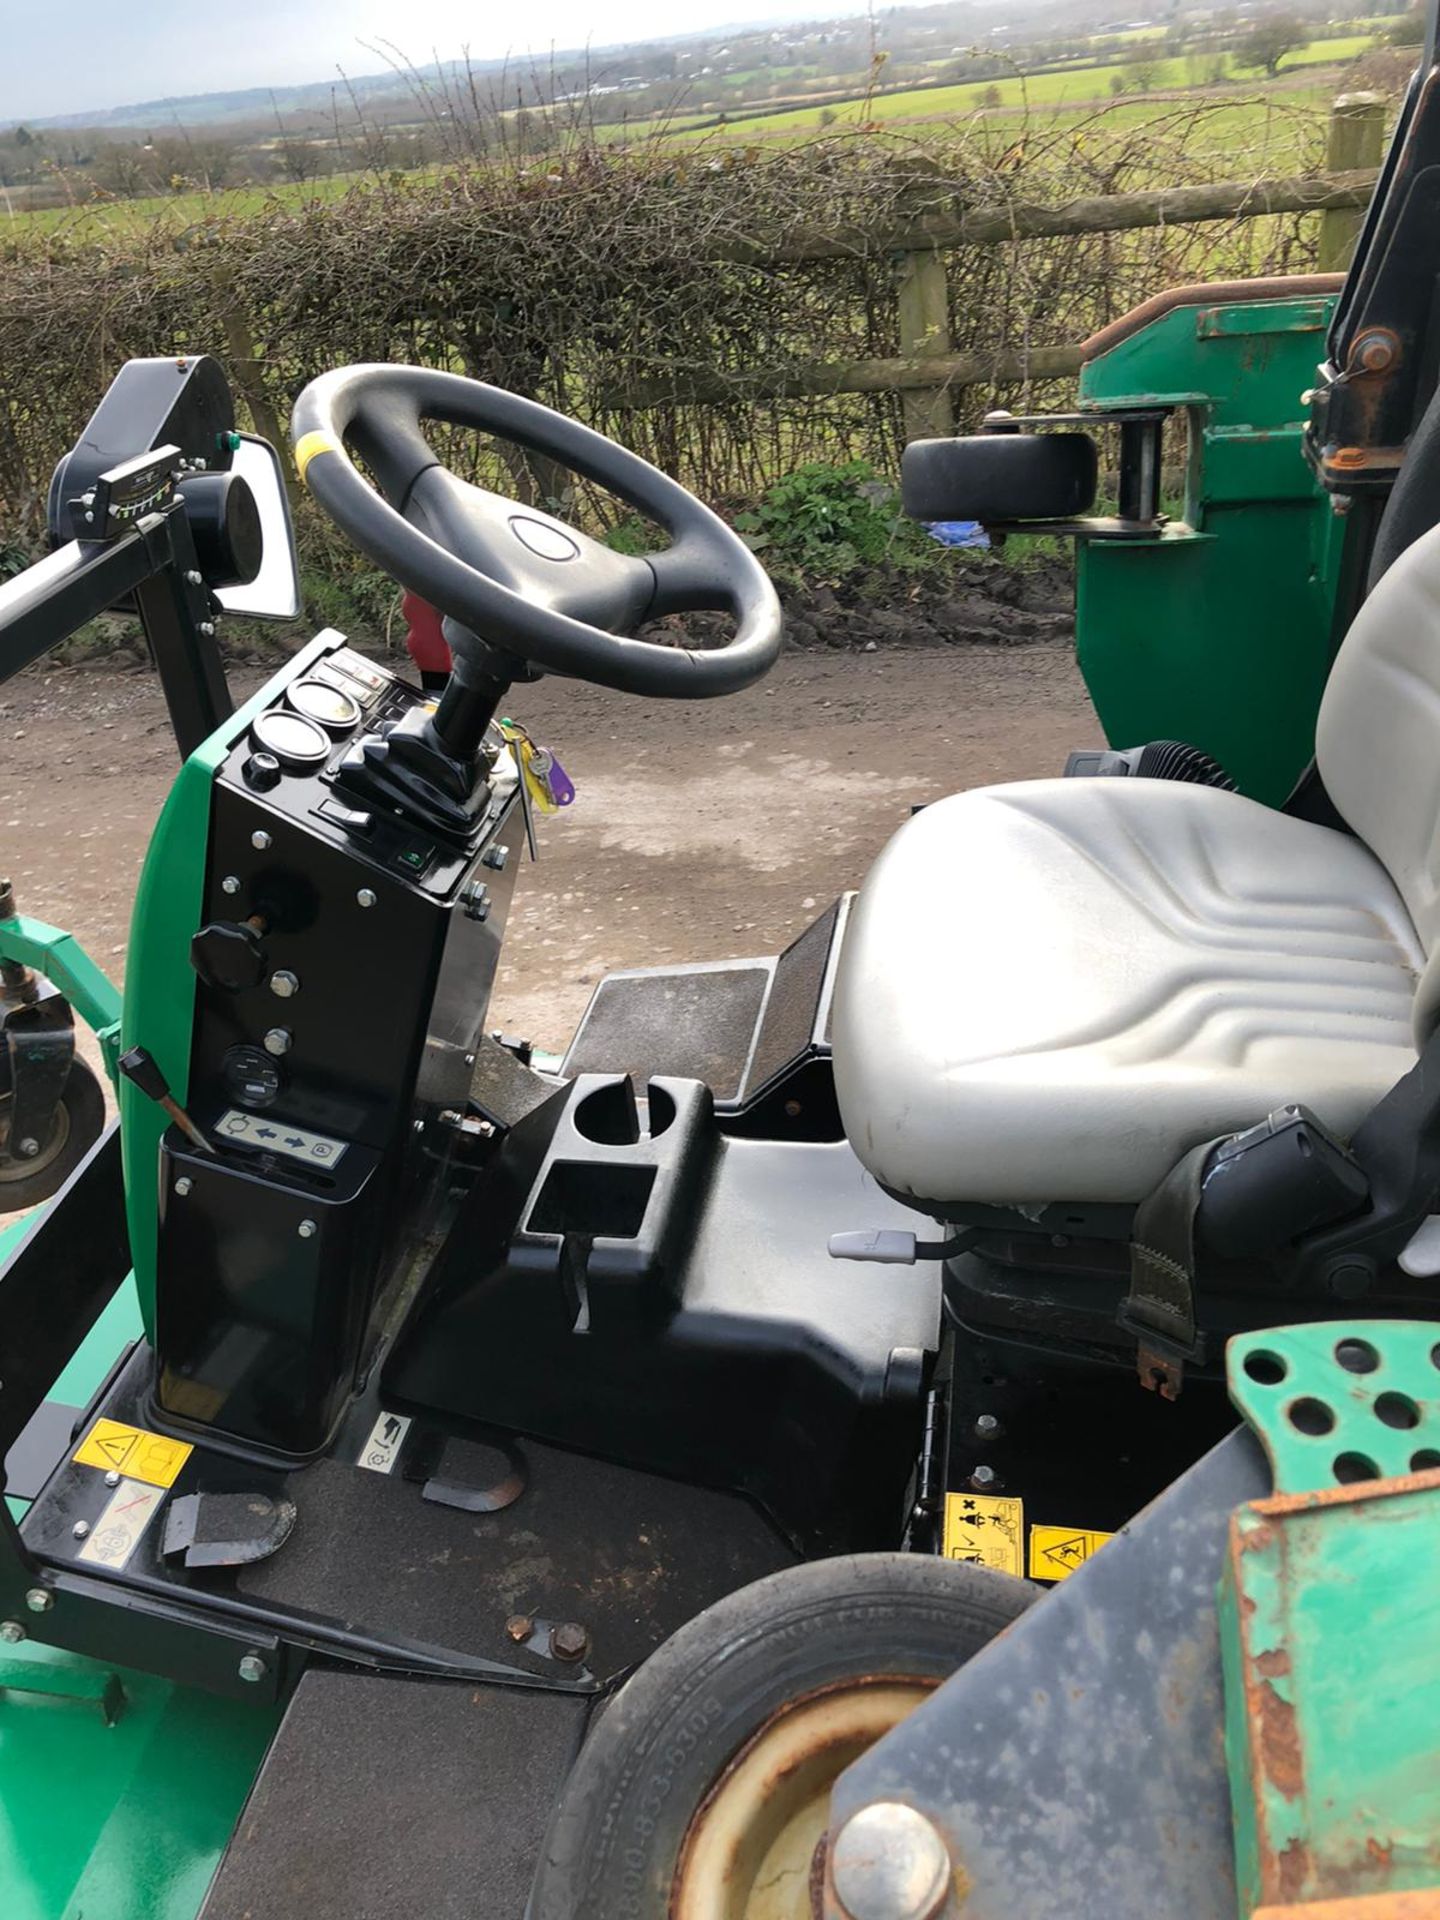 RANSOMES HR6010 BATWING RIDE ON LAWN MOWER, YEAR 2013/62 PLATE, 4 WHEEL DRIVE *PLUS VAT* - Image 4 of 5